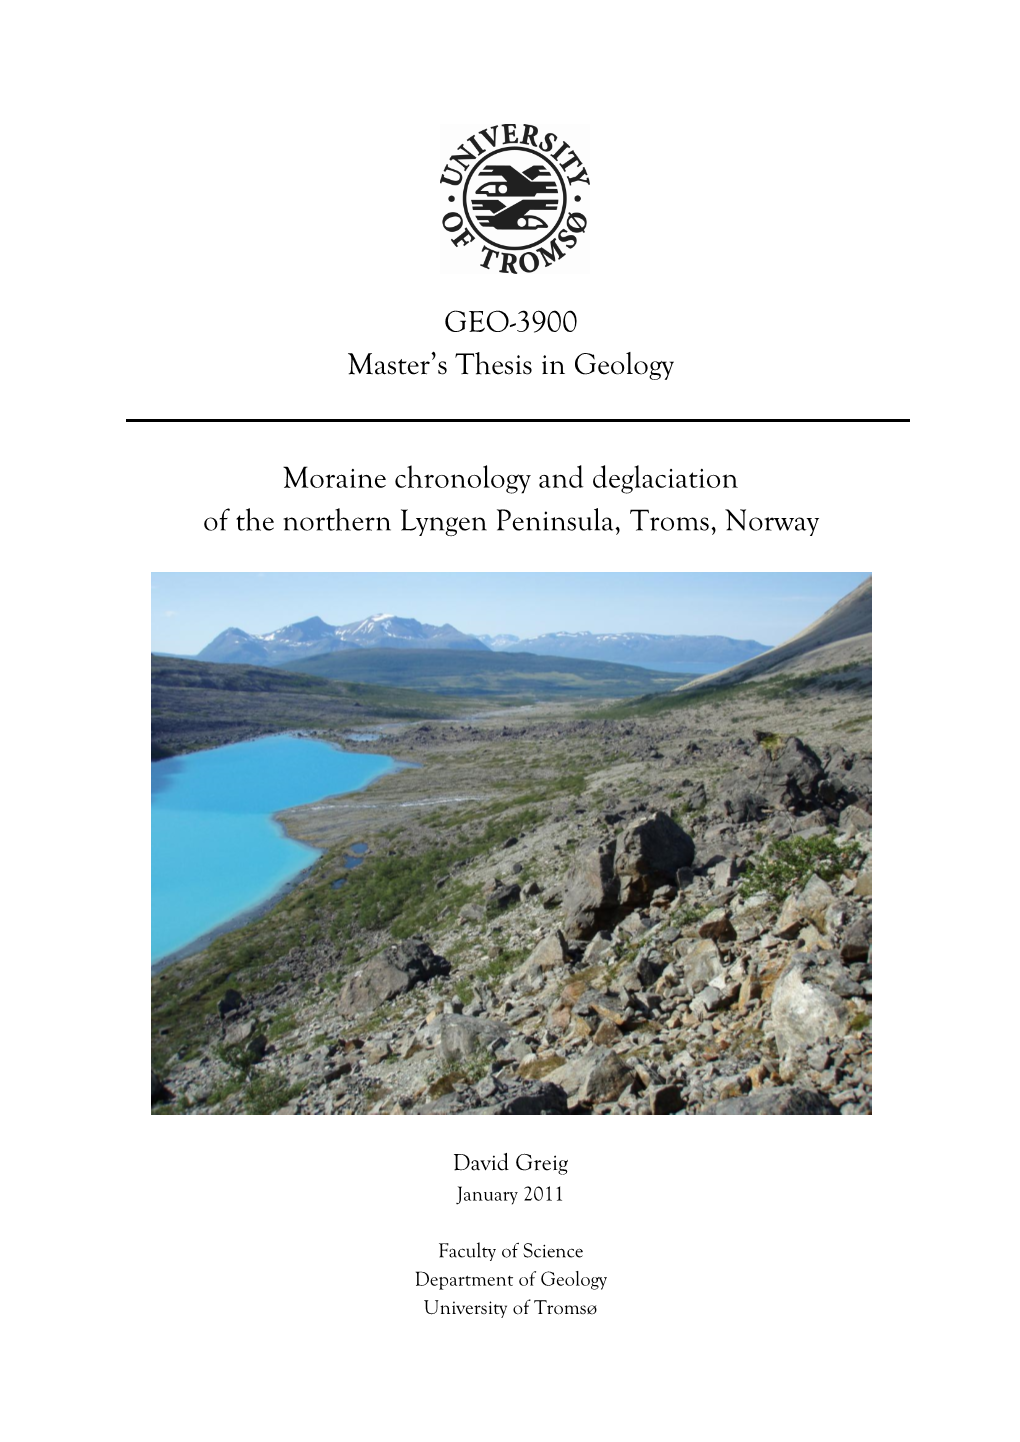 GEO-3900 Master's Thesis in Geology Moraine Chronology And